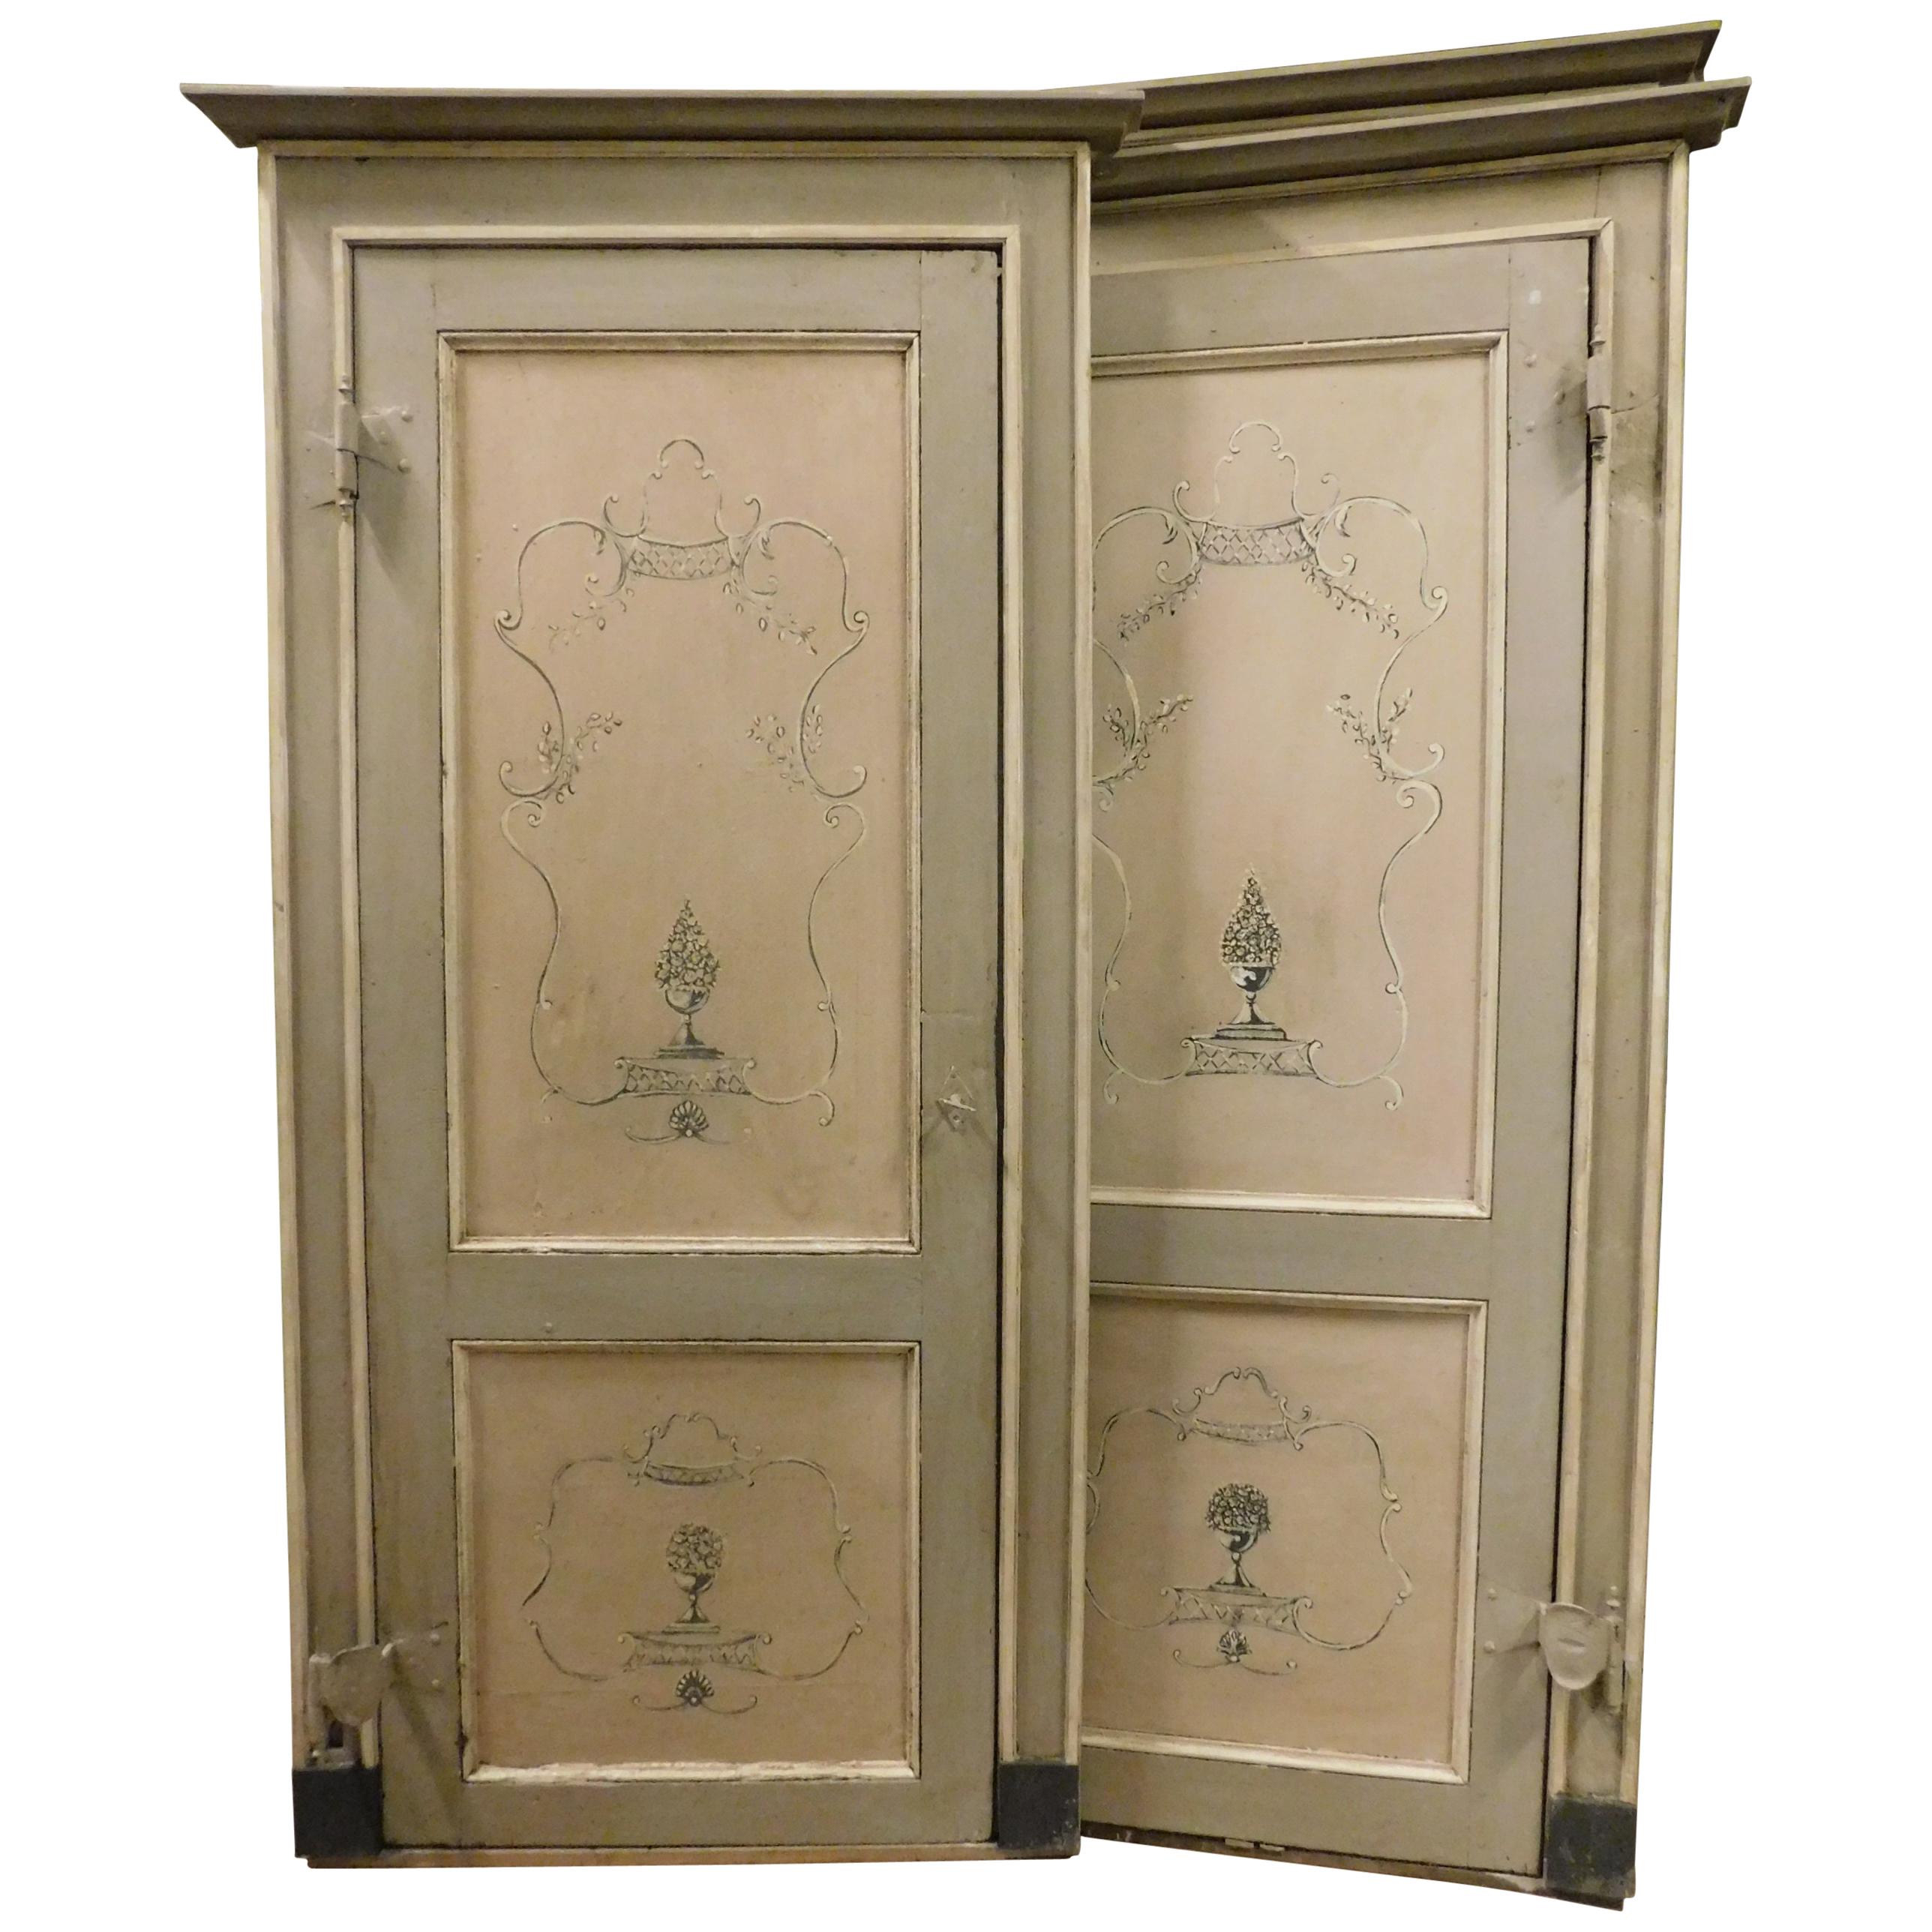 Antique 4 Equal Doors in Lacquered Wood Gray and Beige, Series from Italy, '700